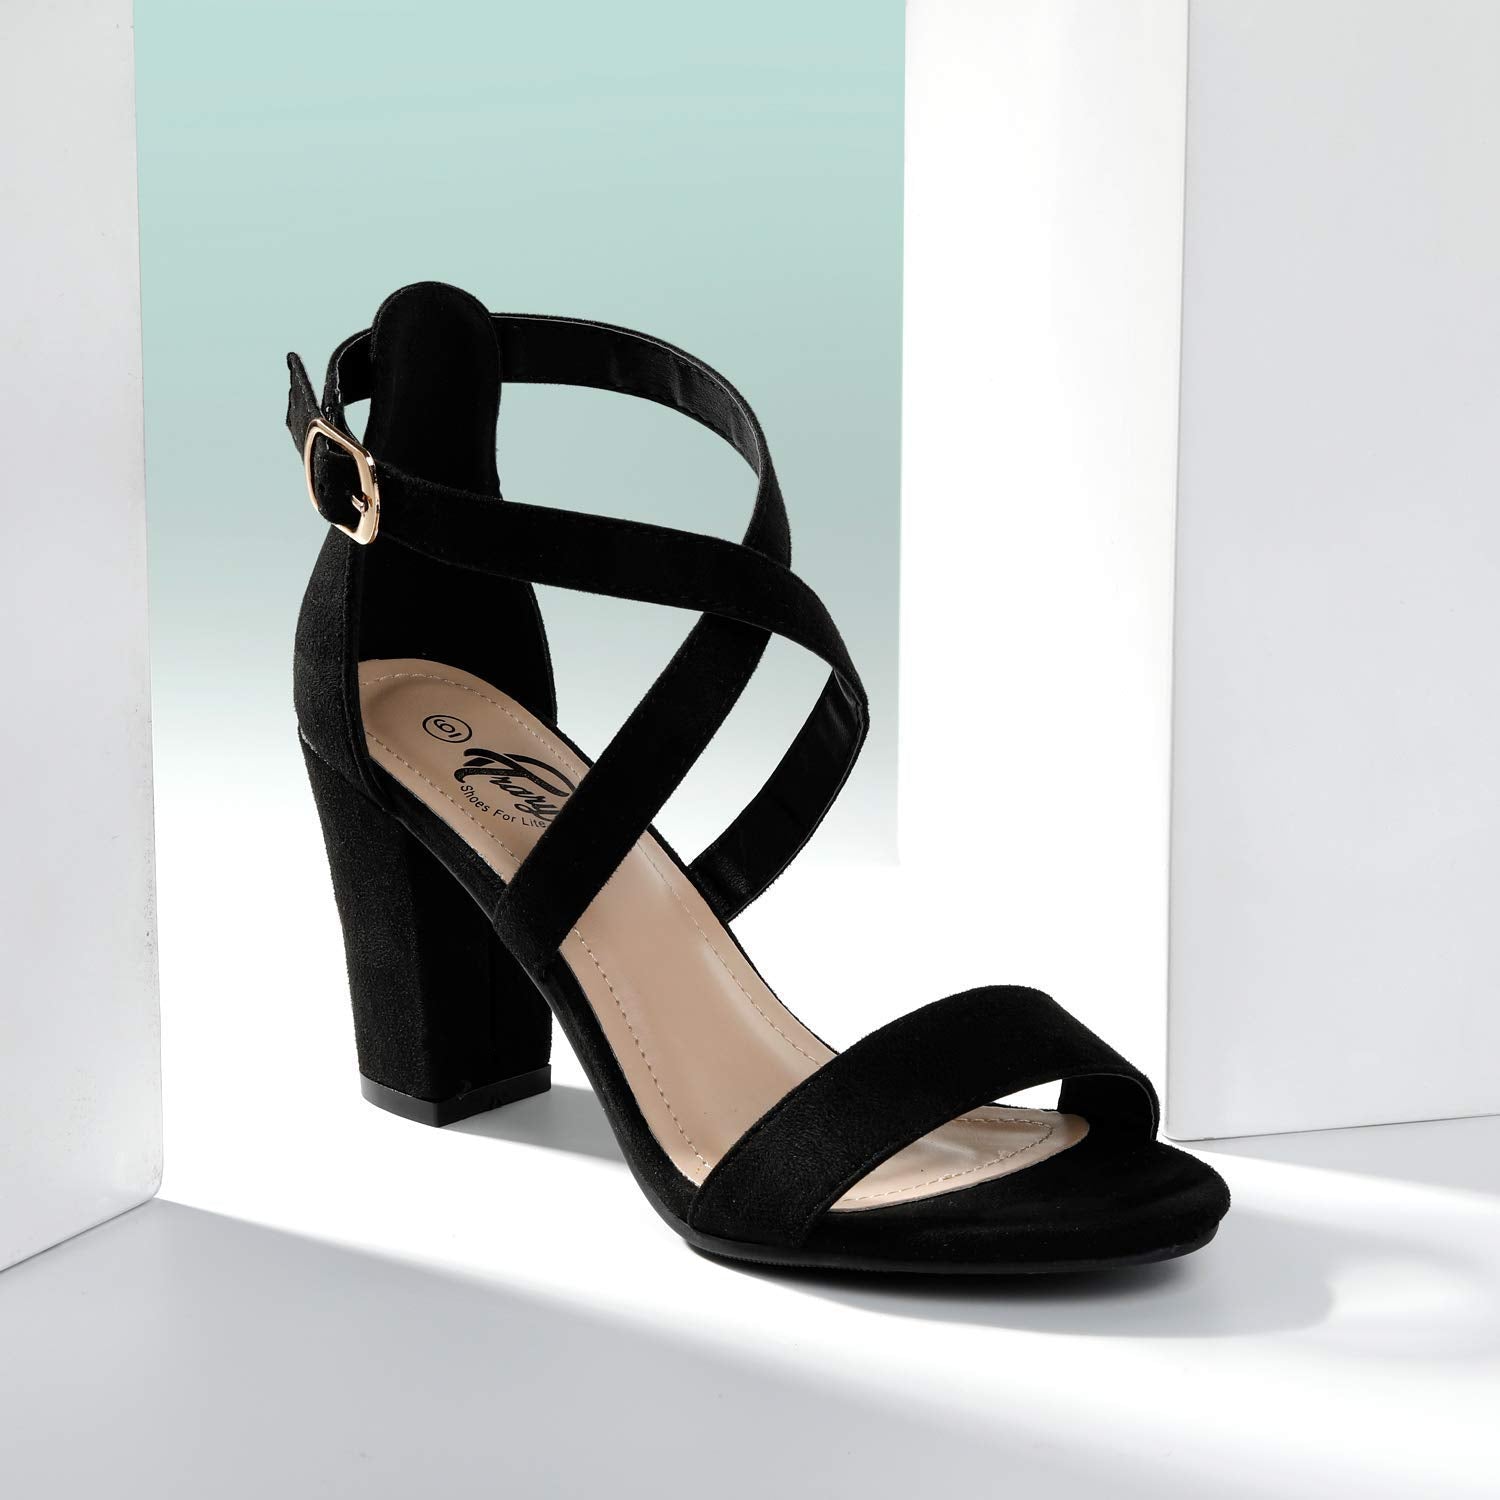 Black Suede Buckle Ankle Strap High Heels – No Doubt Shoes